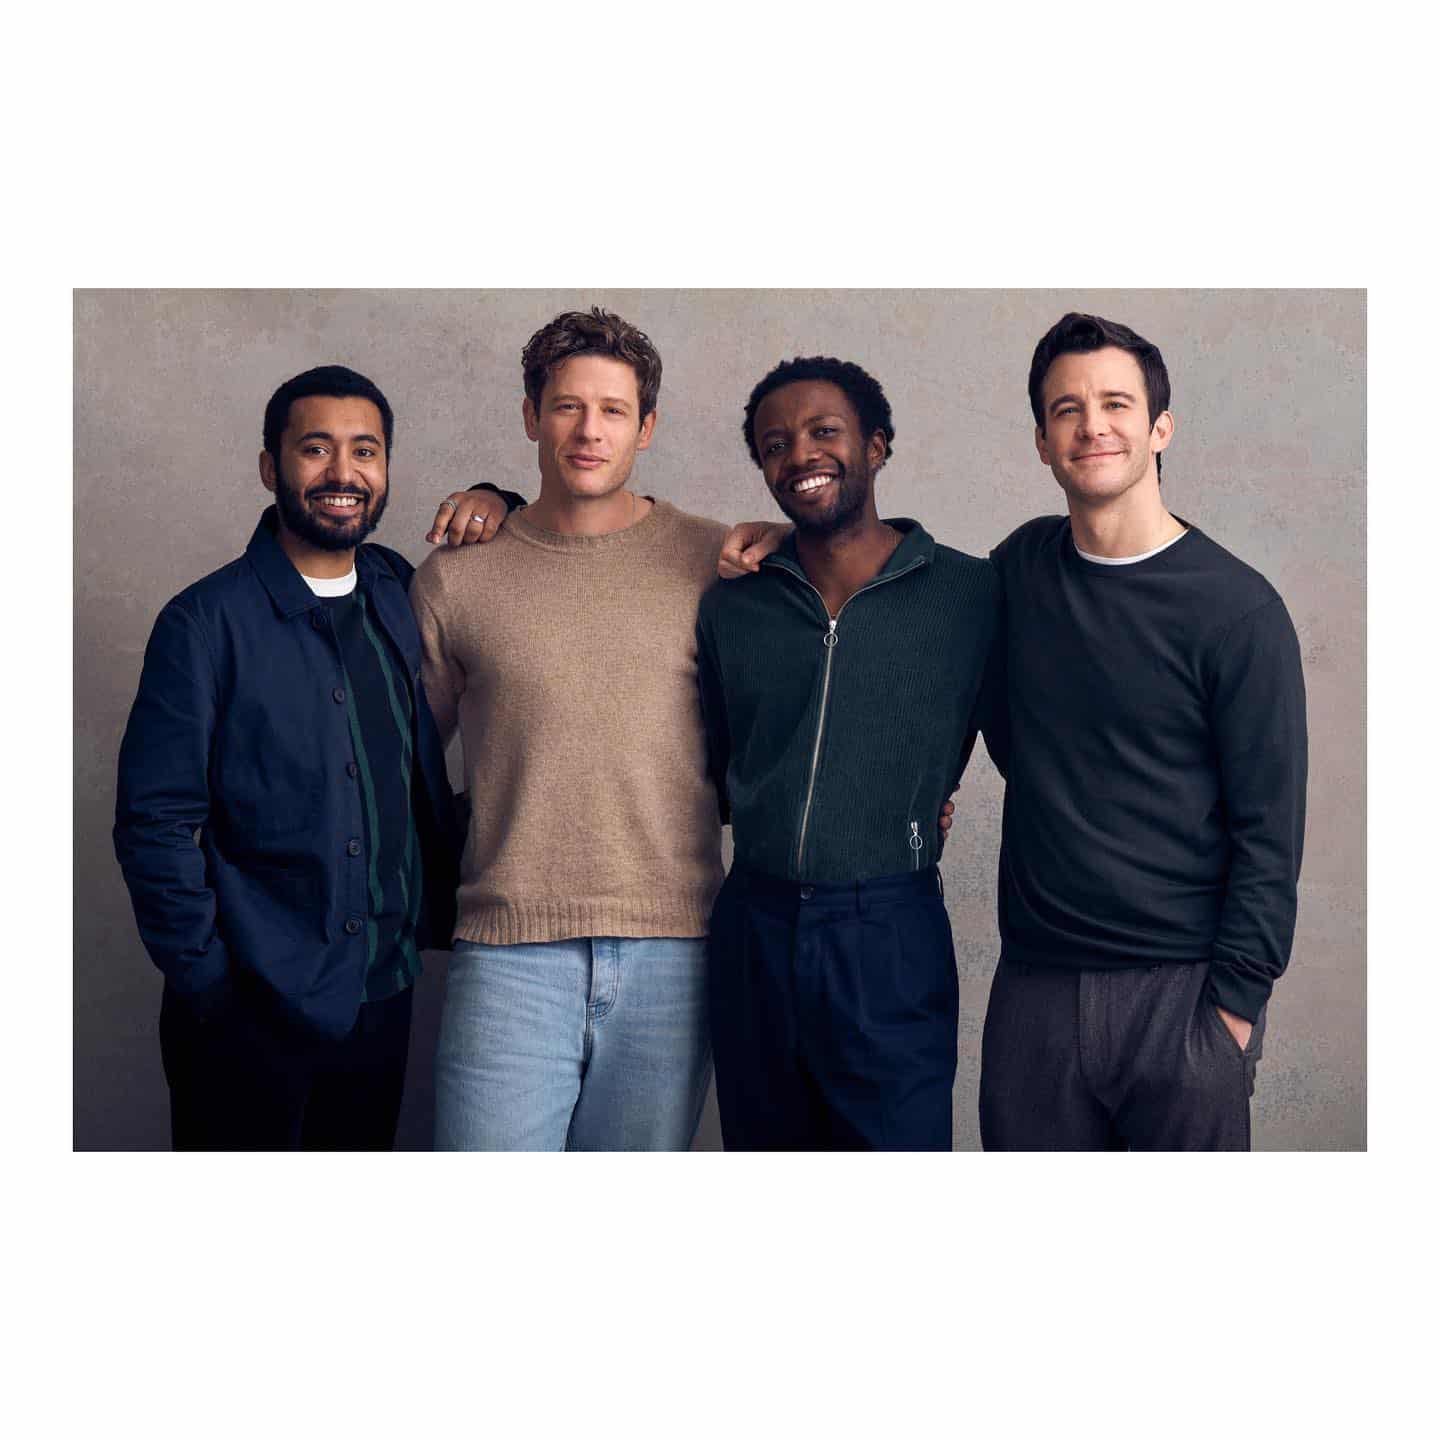 will star in @alittlelifeplay, a West End production of Hanya Yanagihara’s novel.

A Little Life will have a West End run 25th March - 18th June 2023 
.
.
.